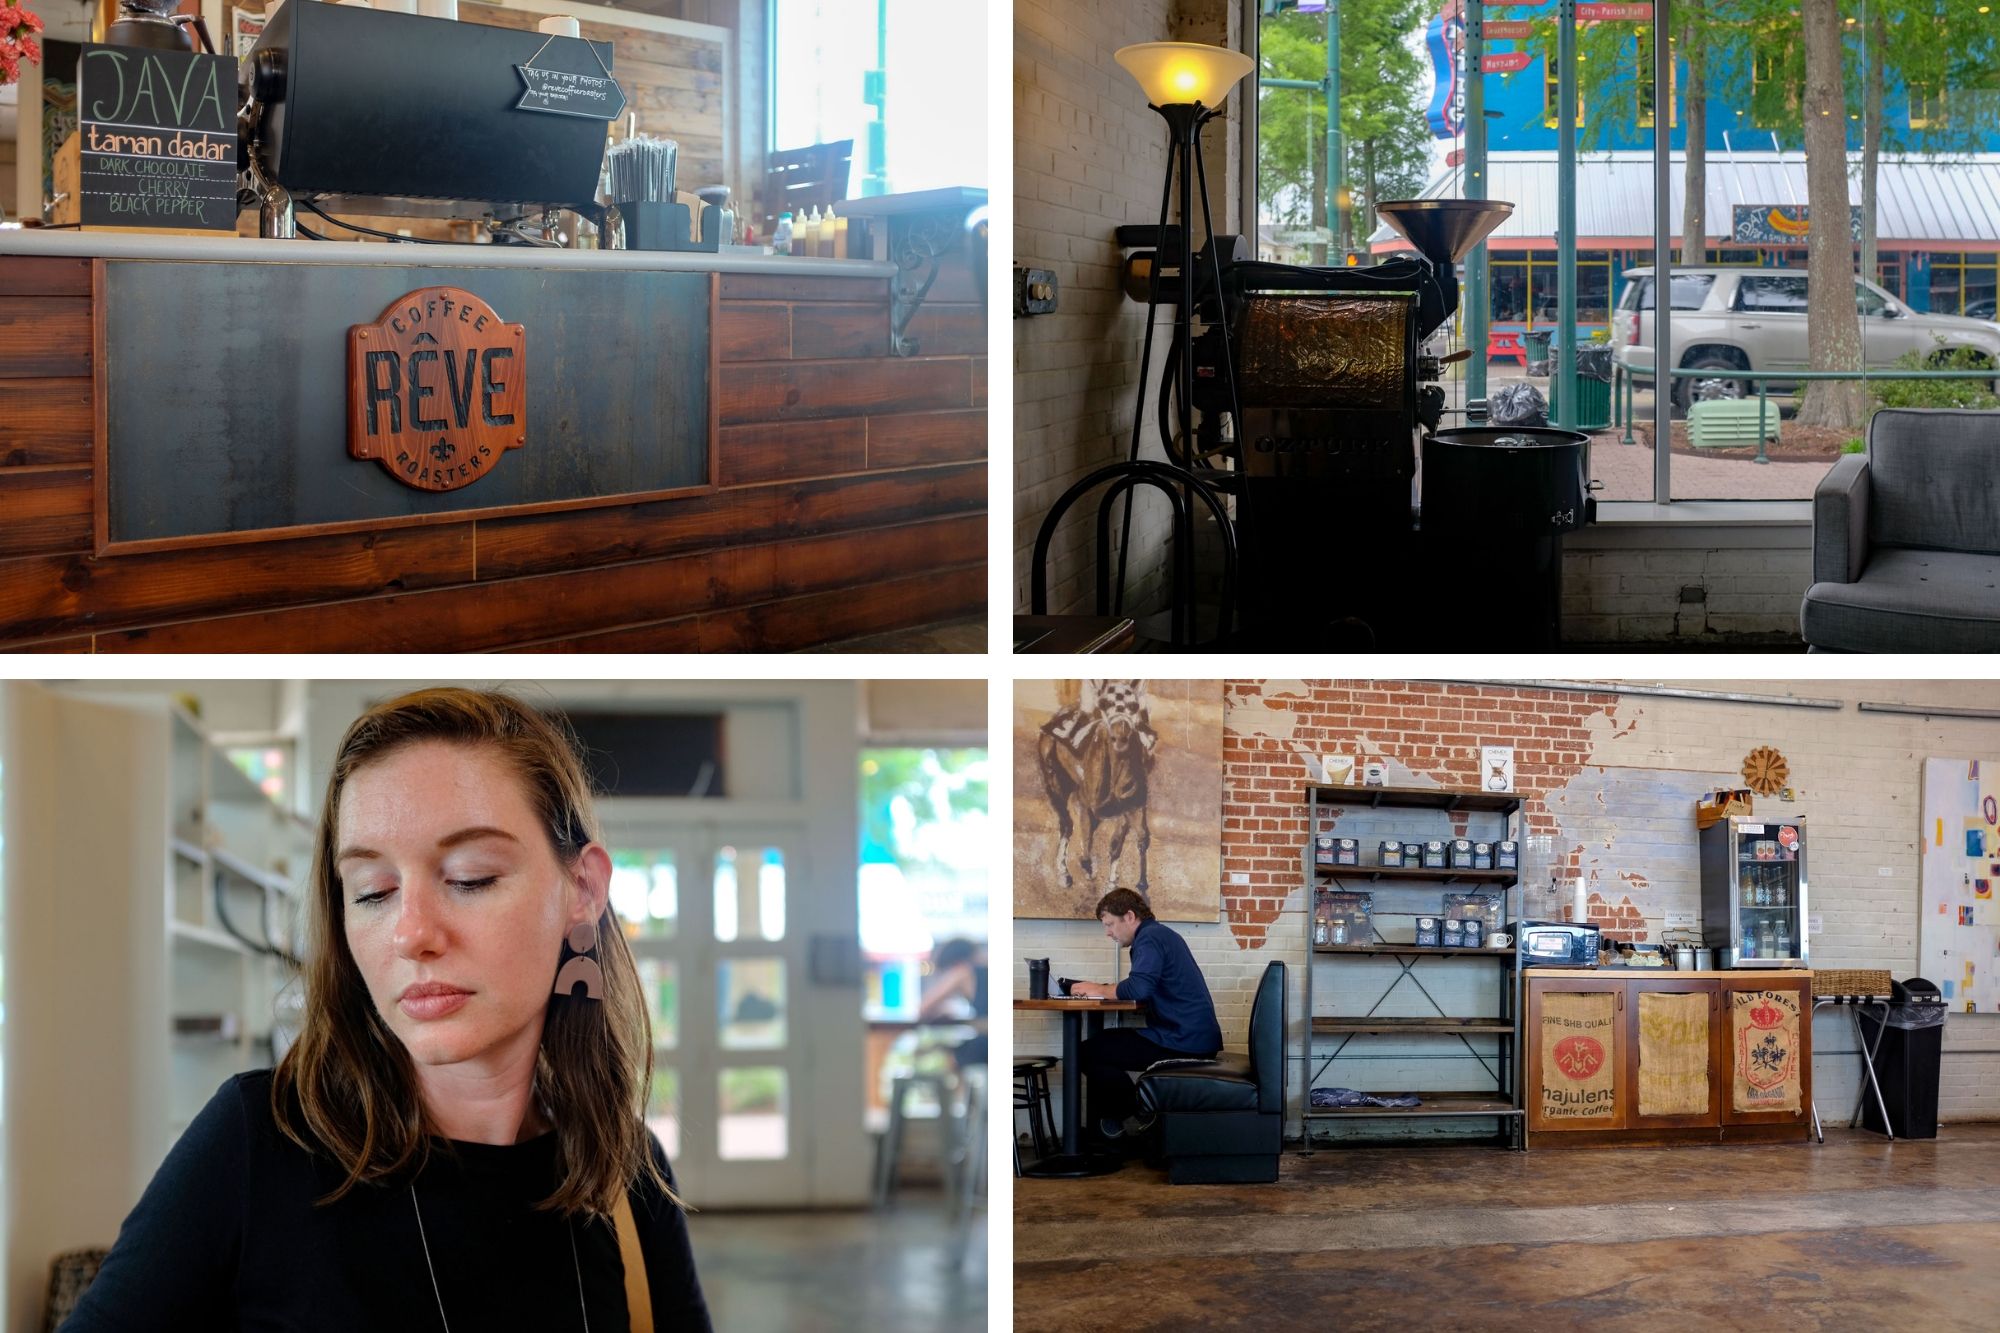 Collage in Reve Coffee: the espresso machine, an antique coffee roaster, krystal sitting inside, and a view of the interior